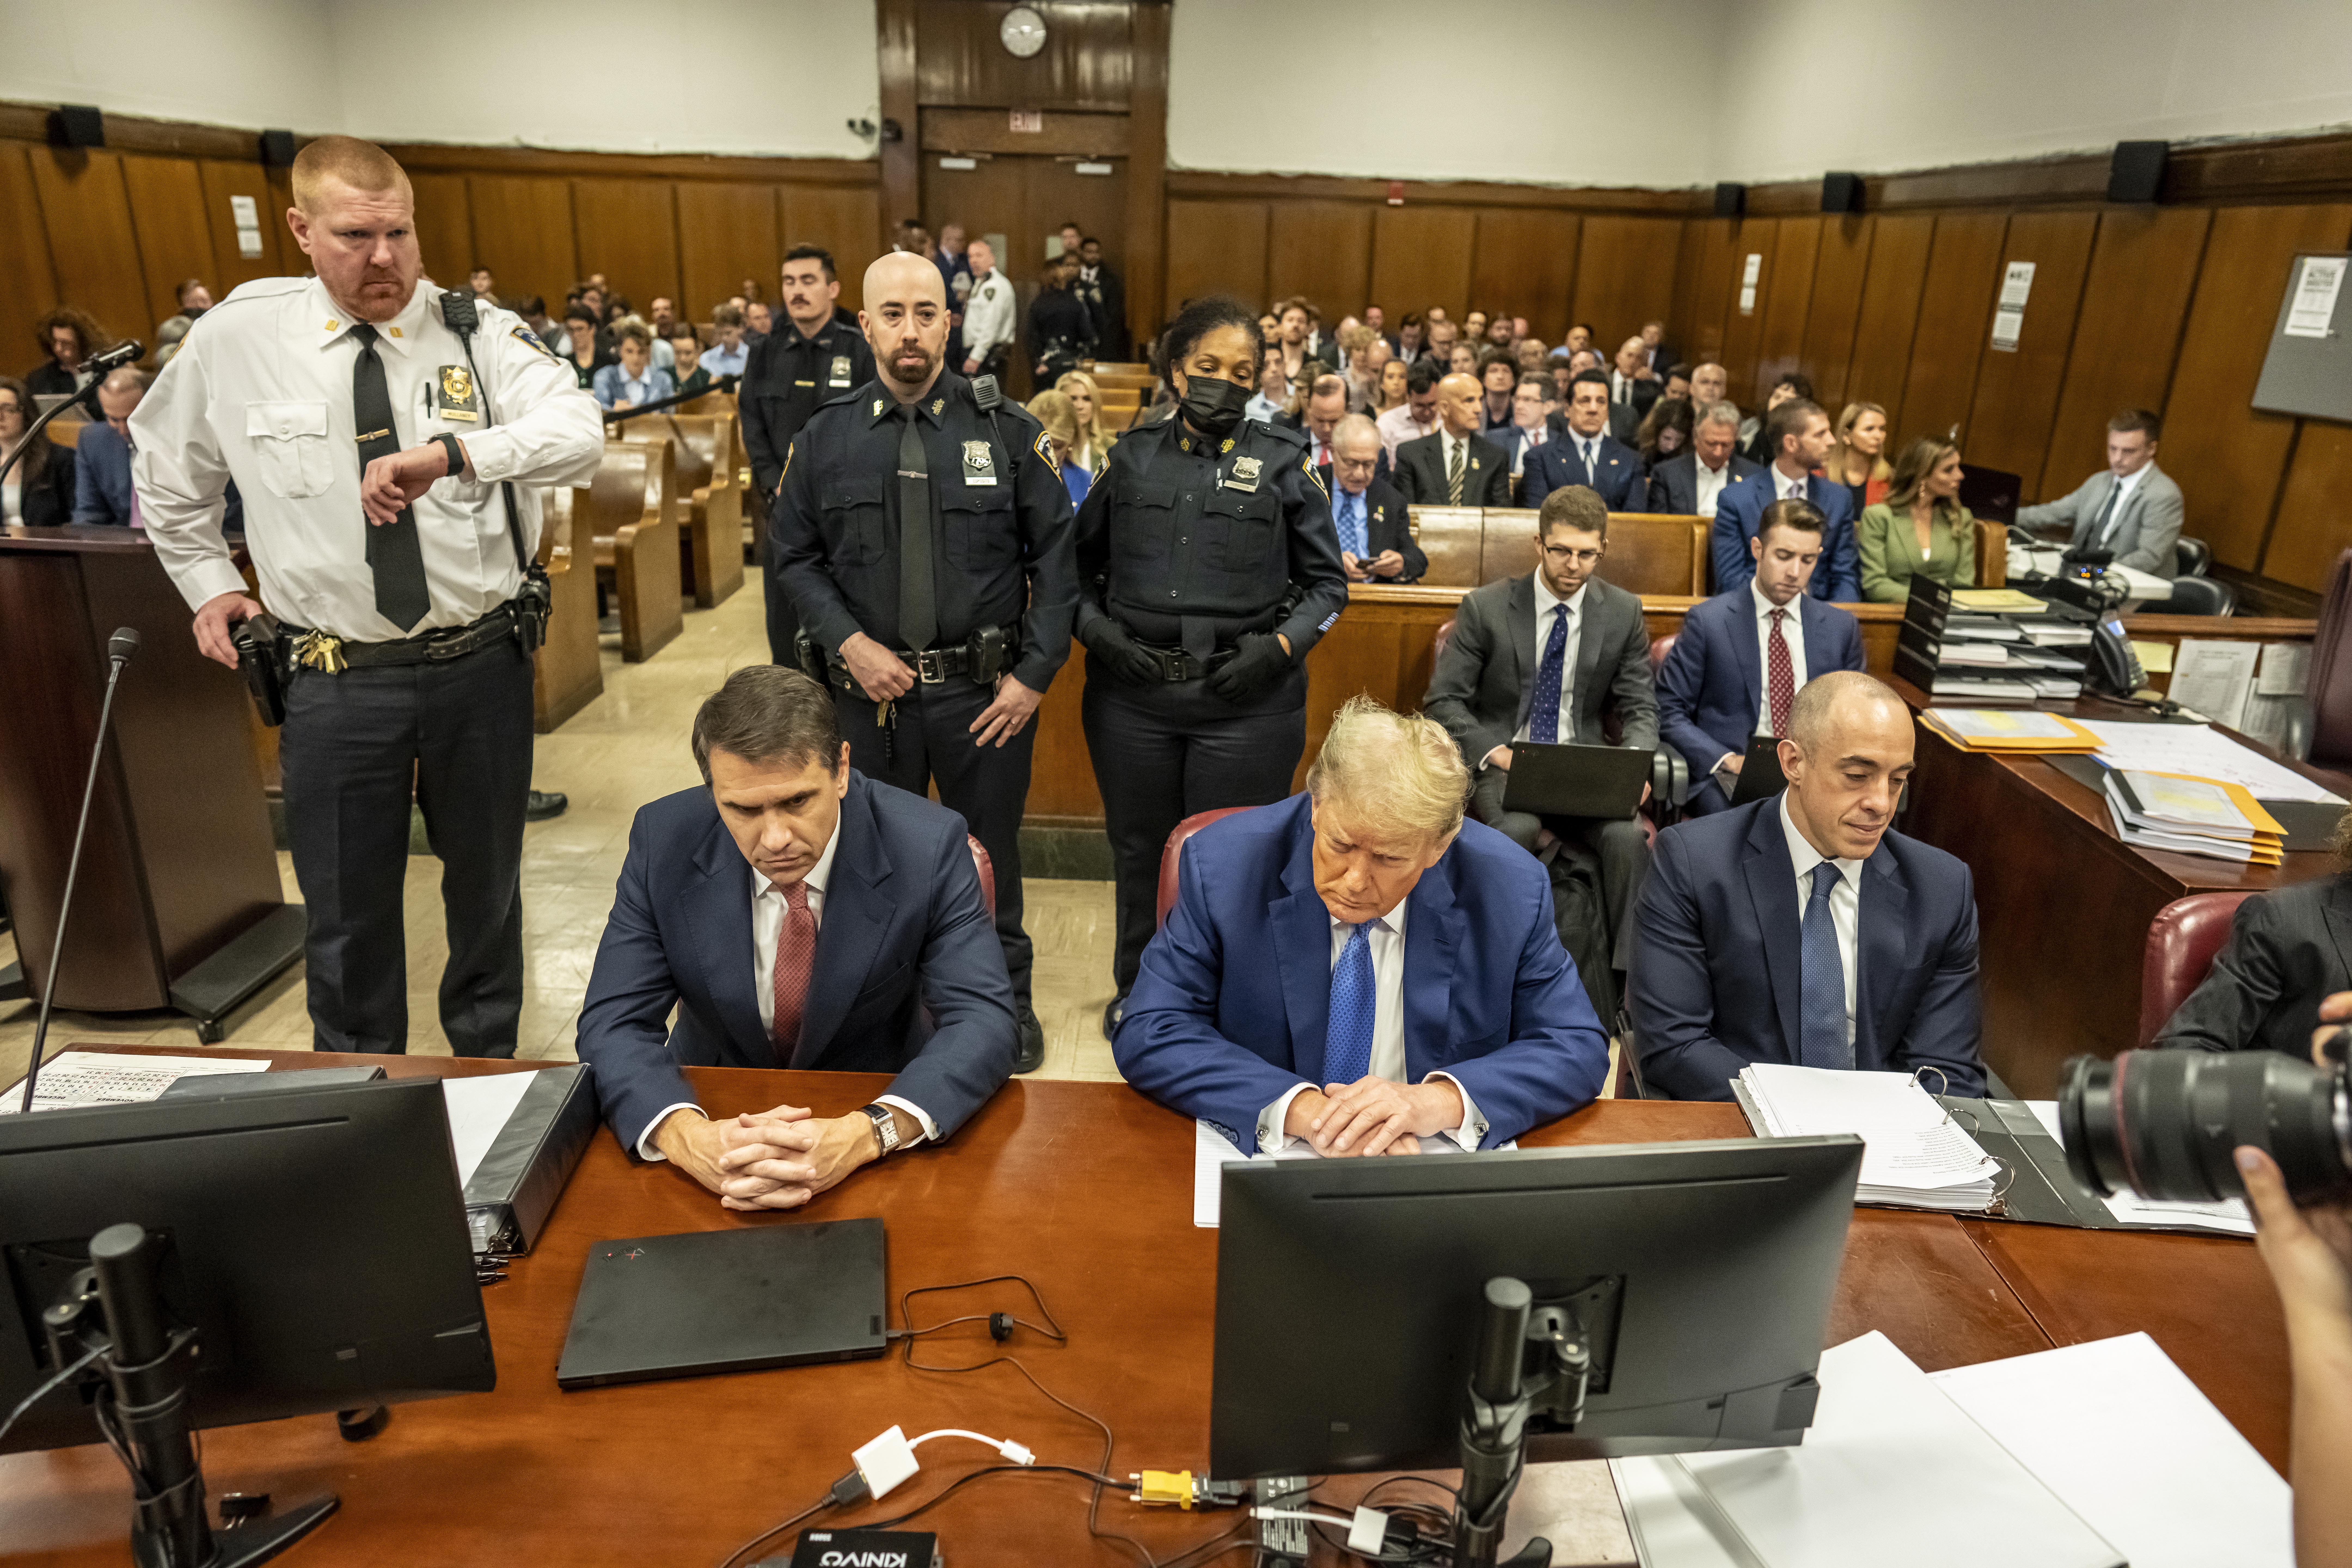 Chaos At Hush Money Trial: Judge Clears Courtroom Over Irritation With Trump Defense Witness — Update